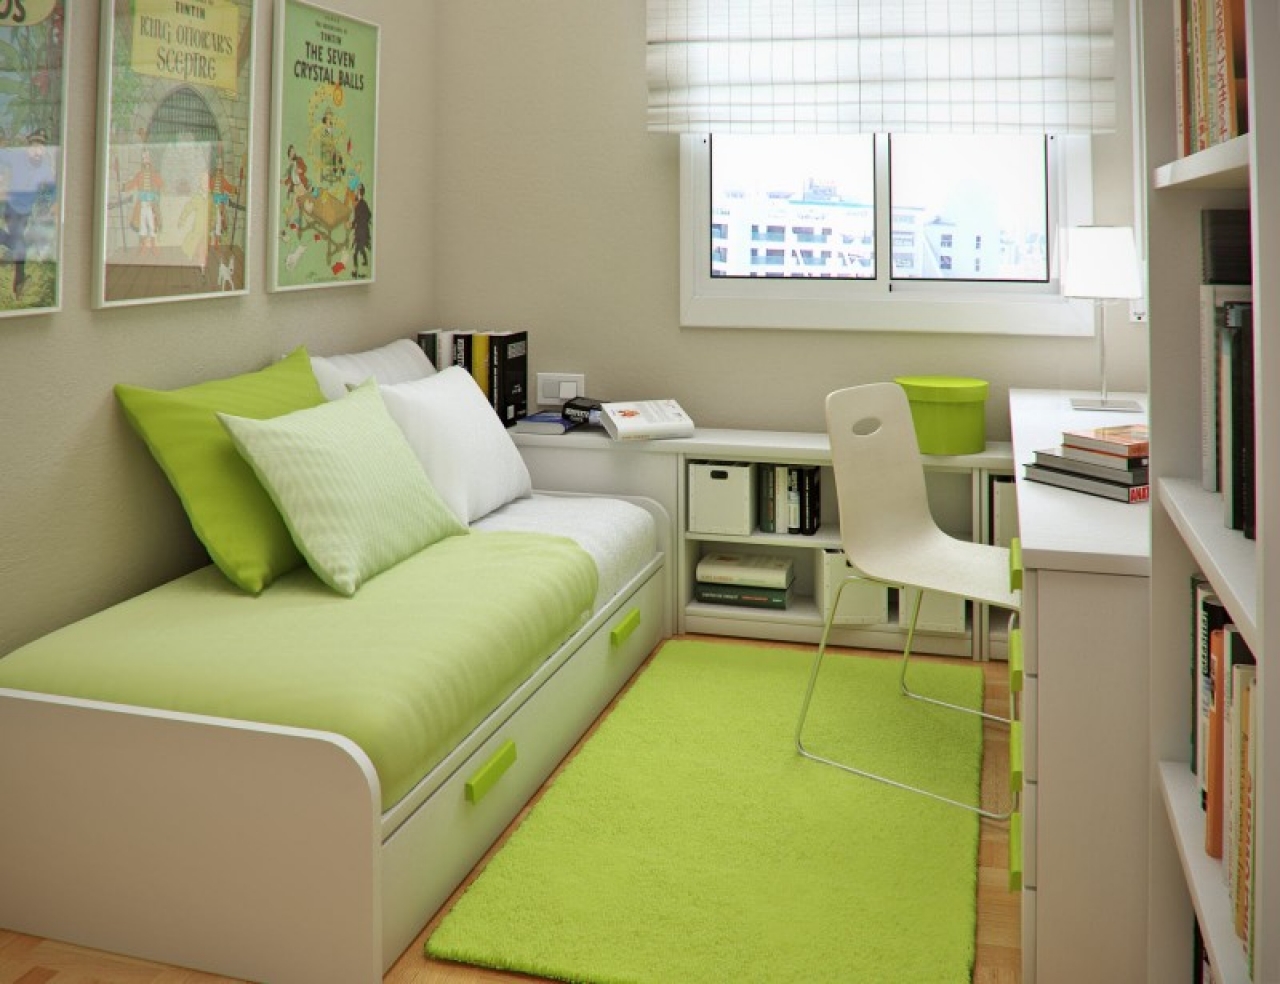 Nice Green Color For Room Interior Design For Small Bedroom With Long Fur Rug White Chairm Wooden Laminated Floor Little Bedroom And Pillow Wall Pics Books Lamp Box Storage Curtain And Window Bedroom